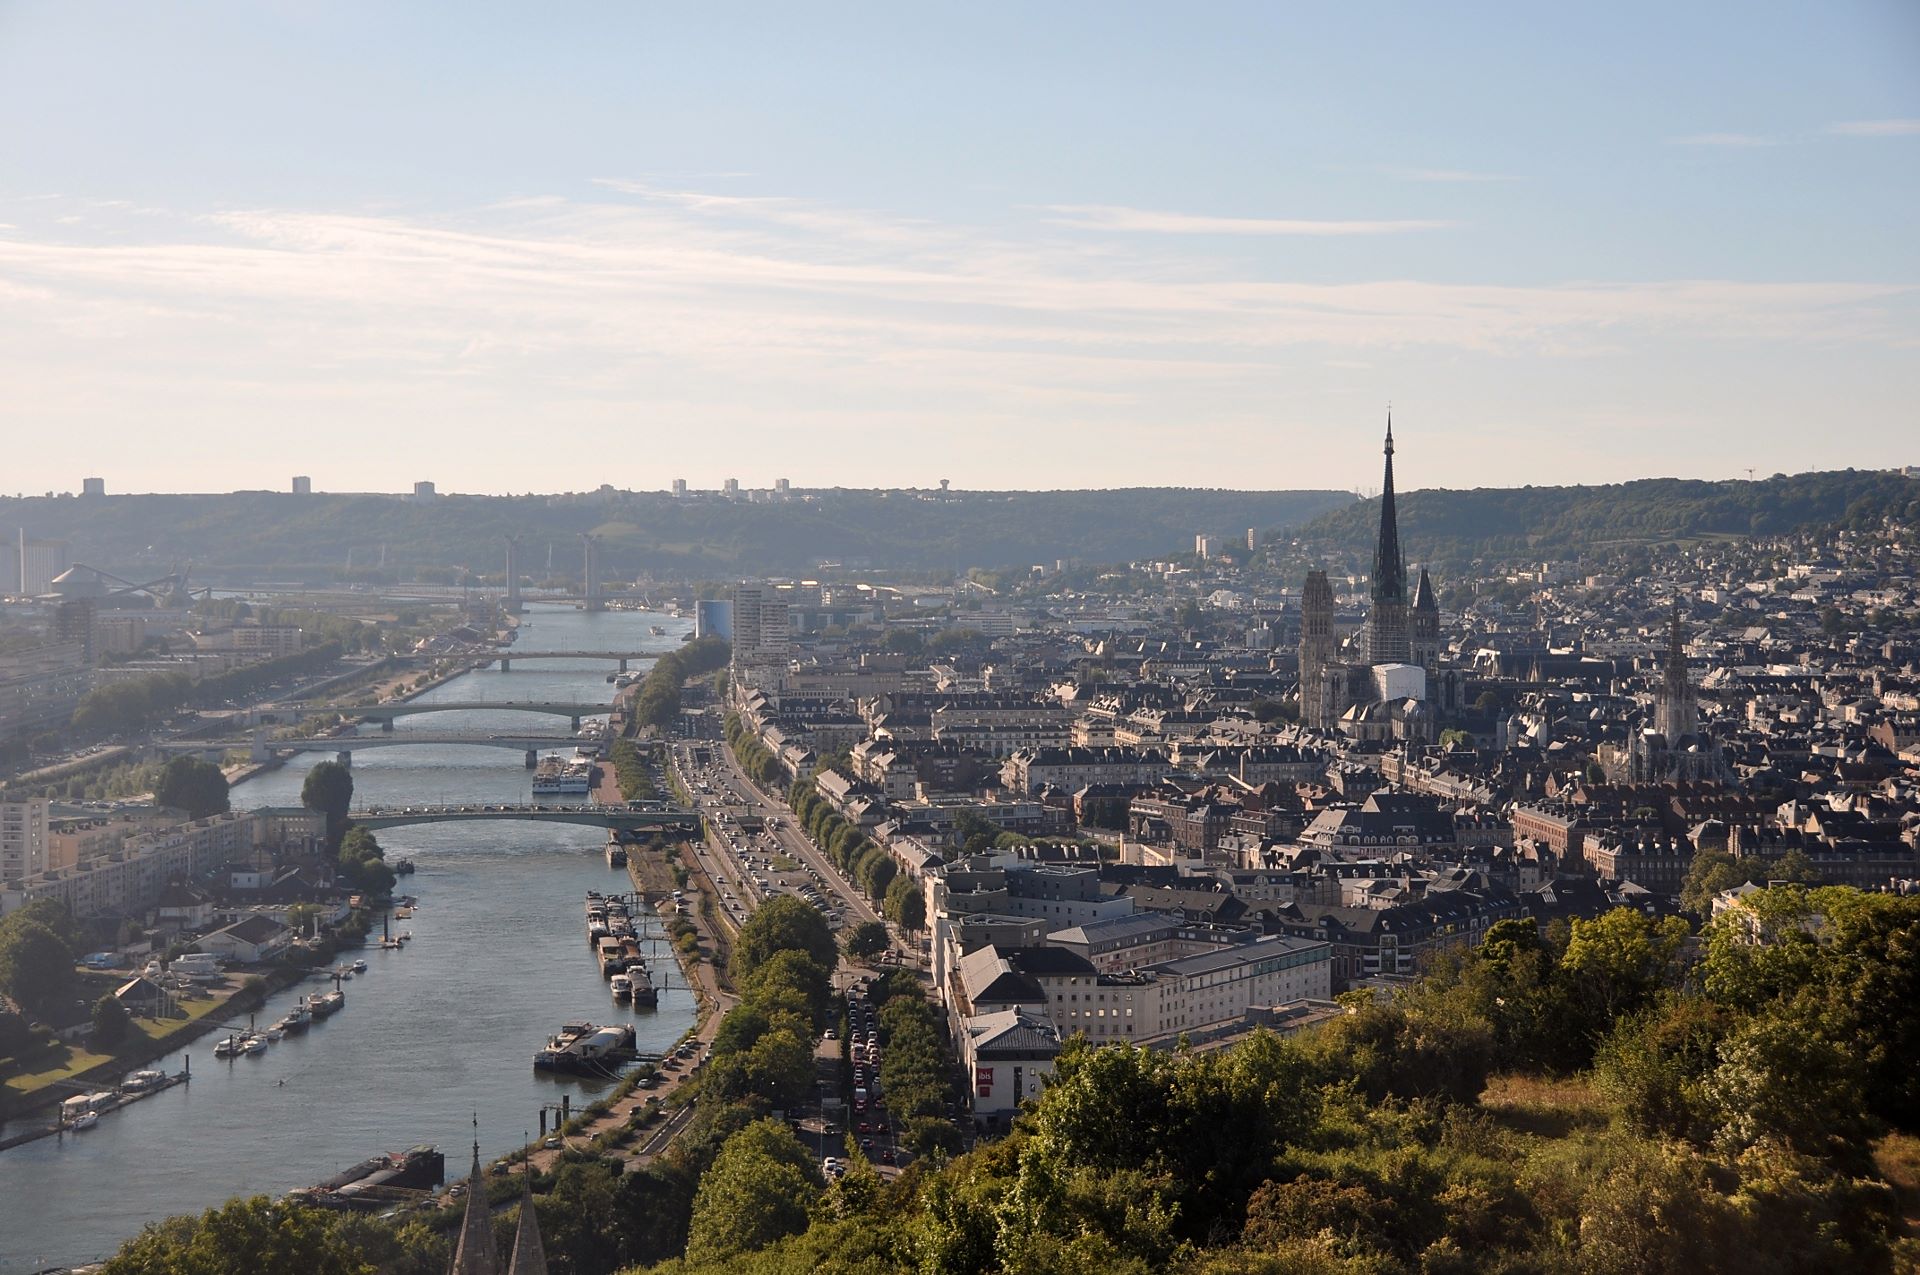 Image on the button leading to Rouen's description page : A photography of Rouen.